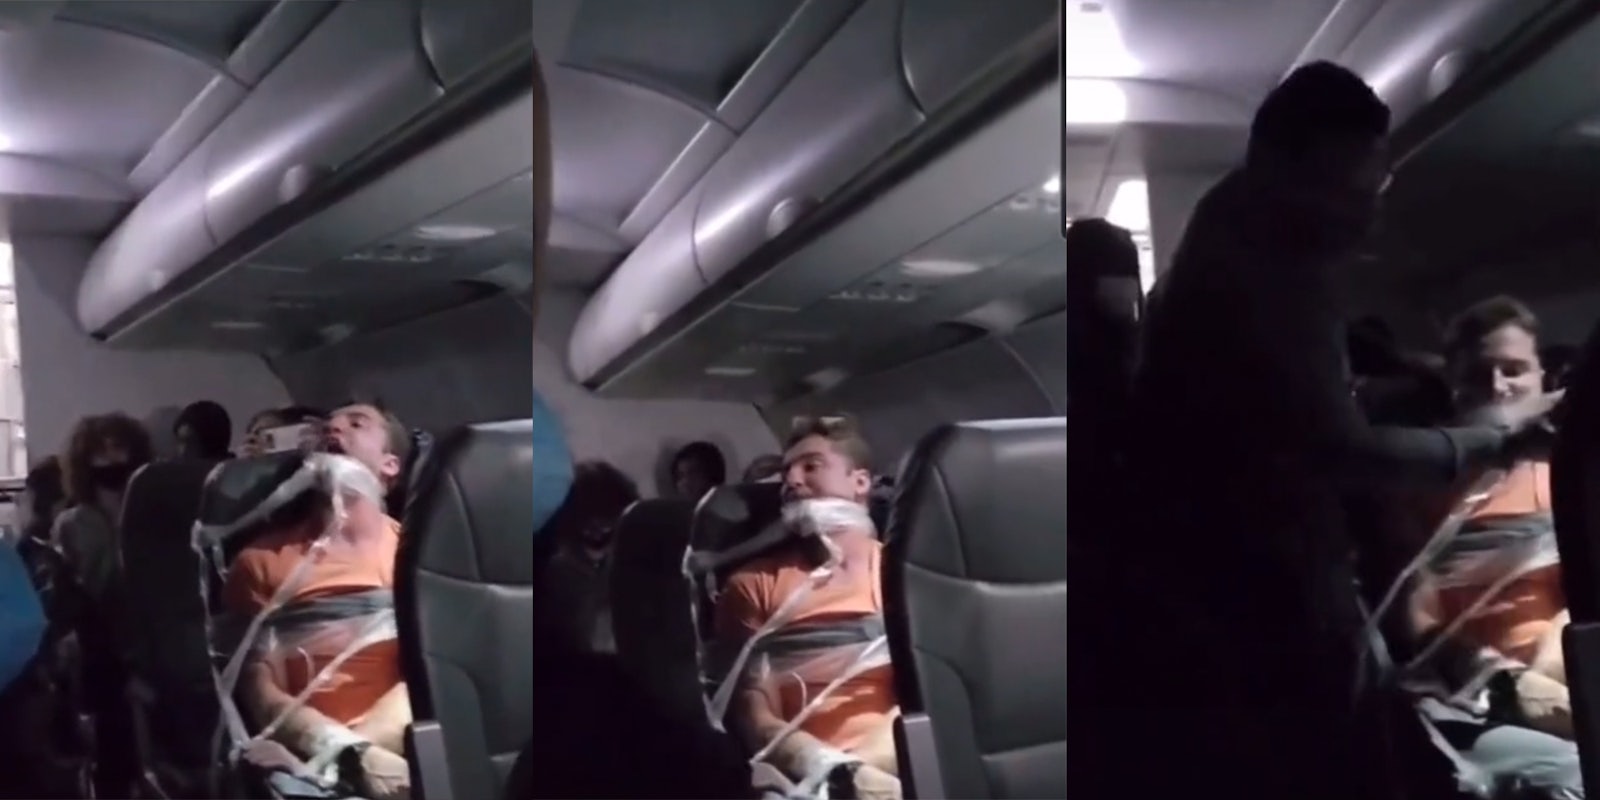 A TikTok shows a passenger restrained on a flight yelling for help.